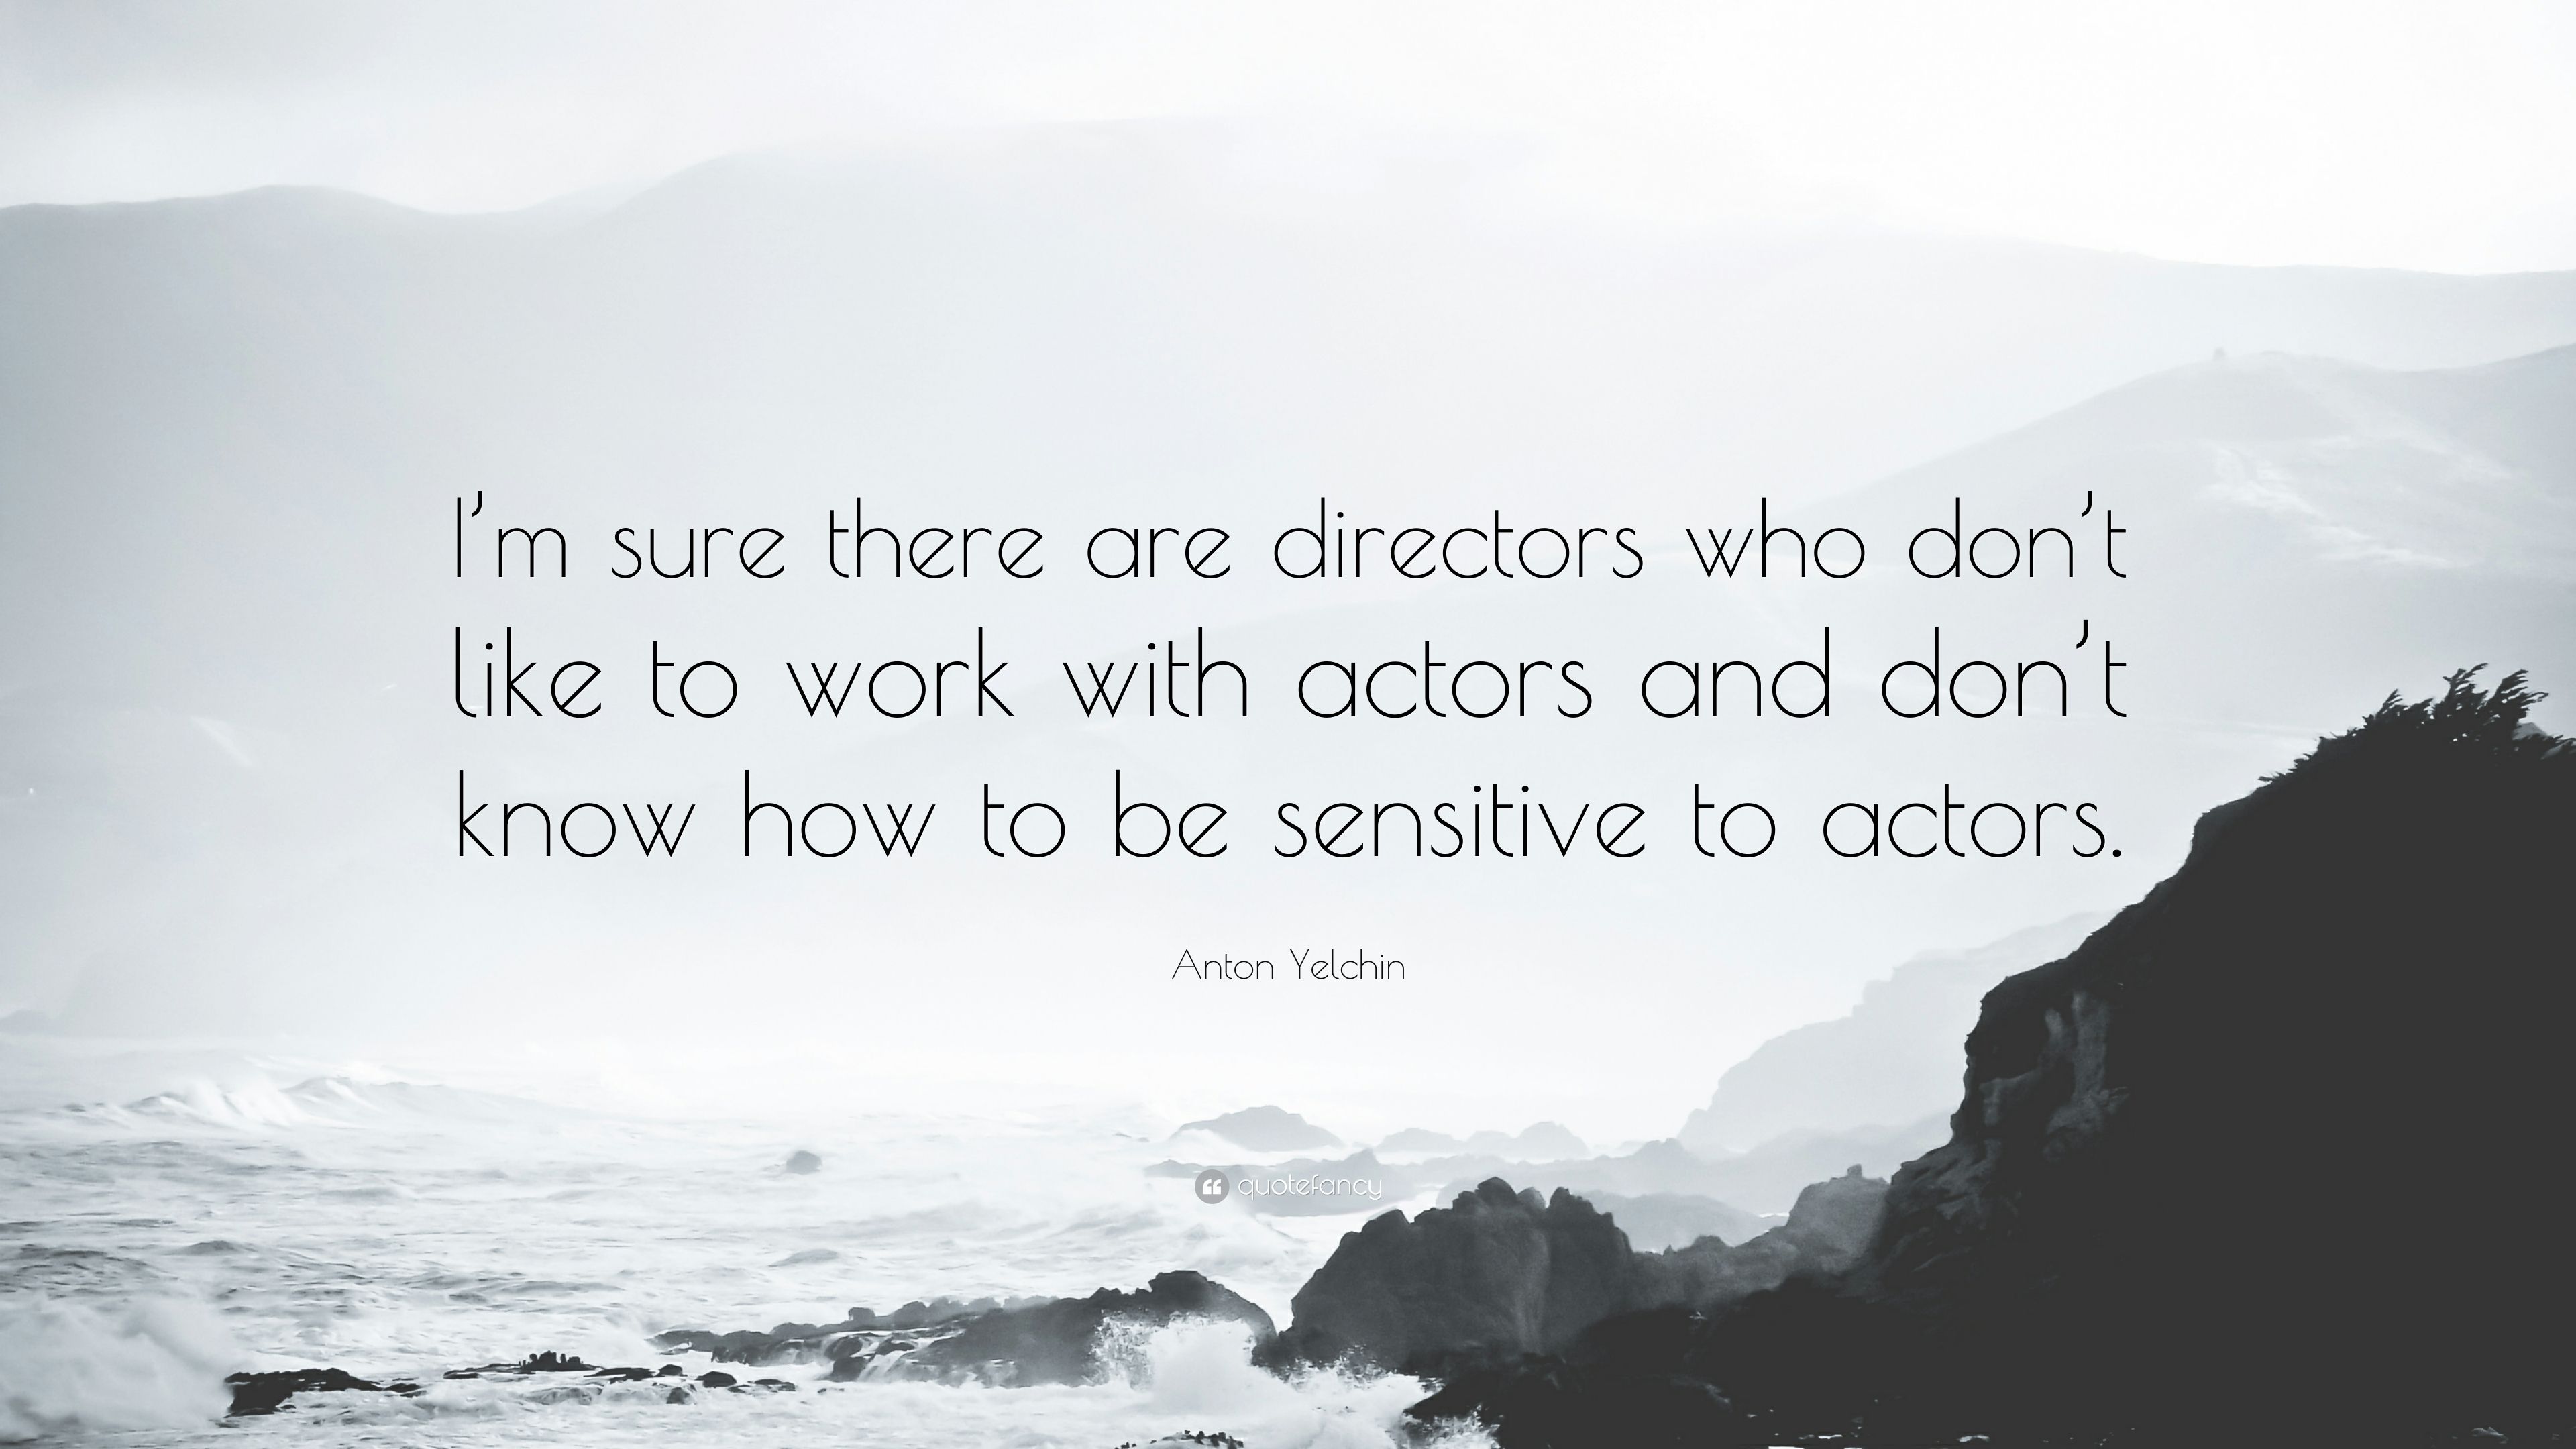 Anton Yelchin Quote: “I'm sure there are directors who don't like